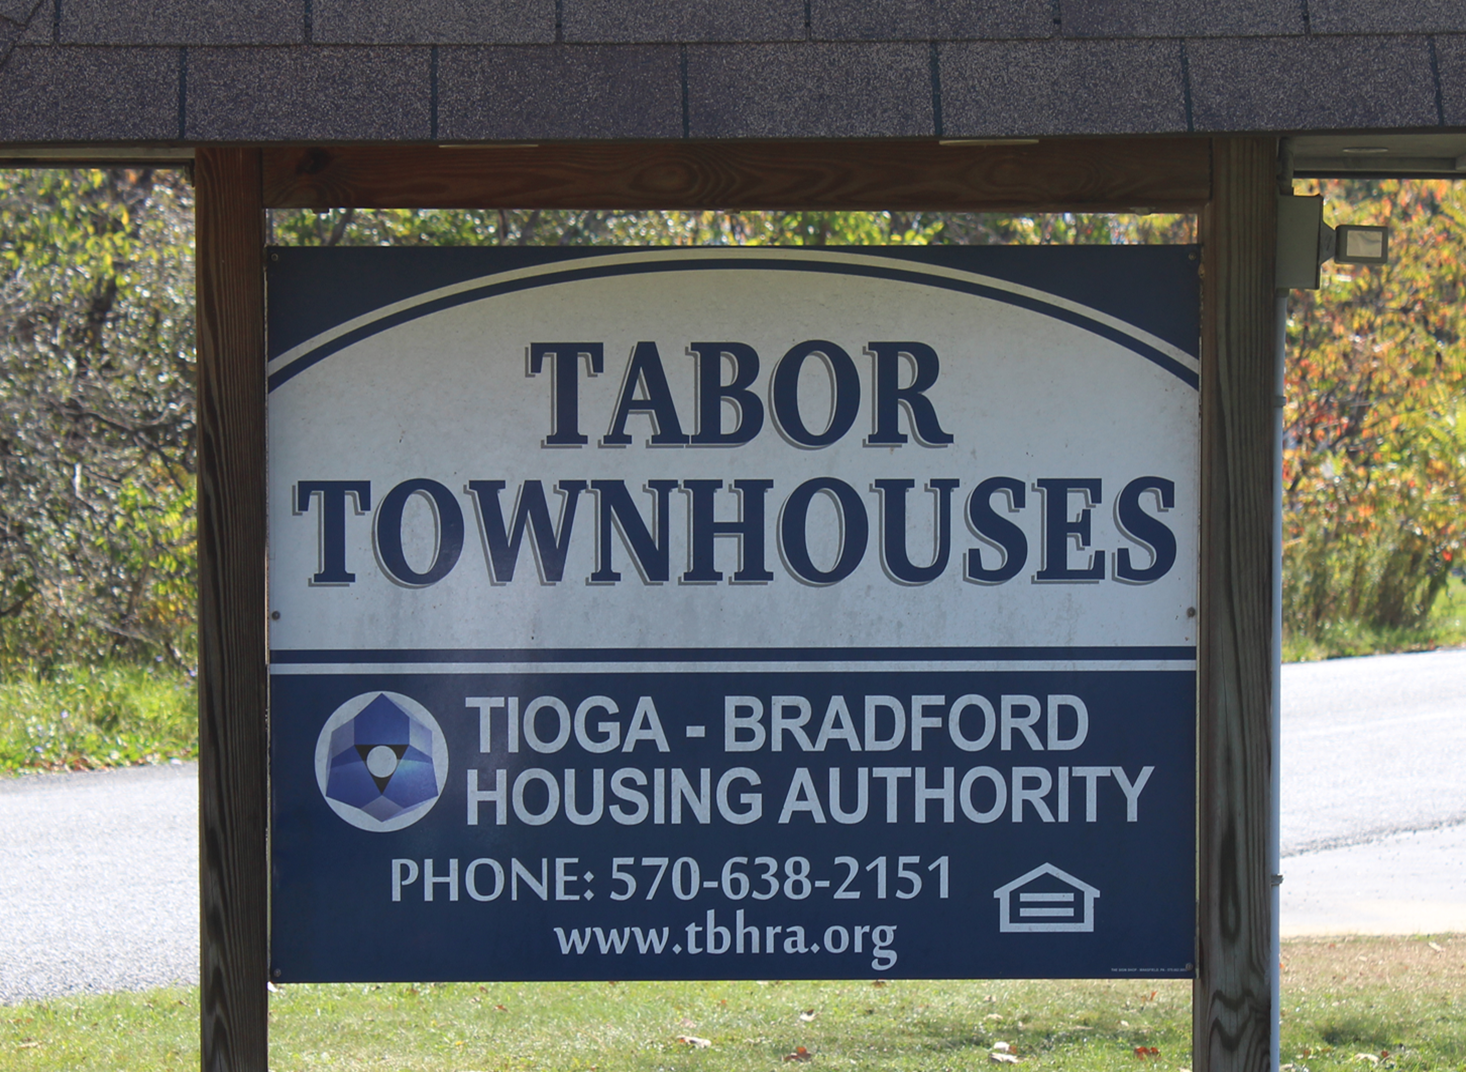 Tabor Townhouses